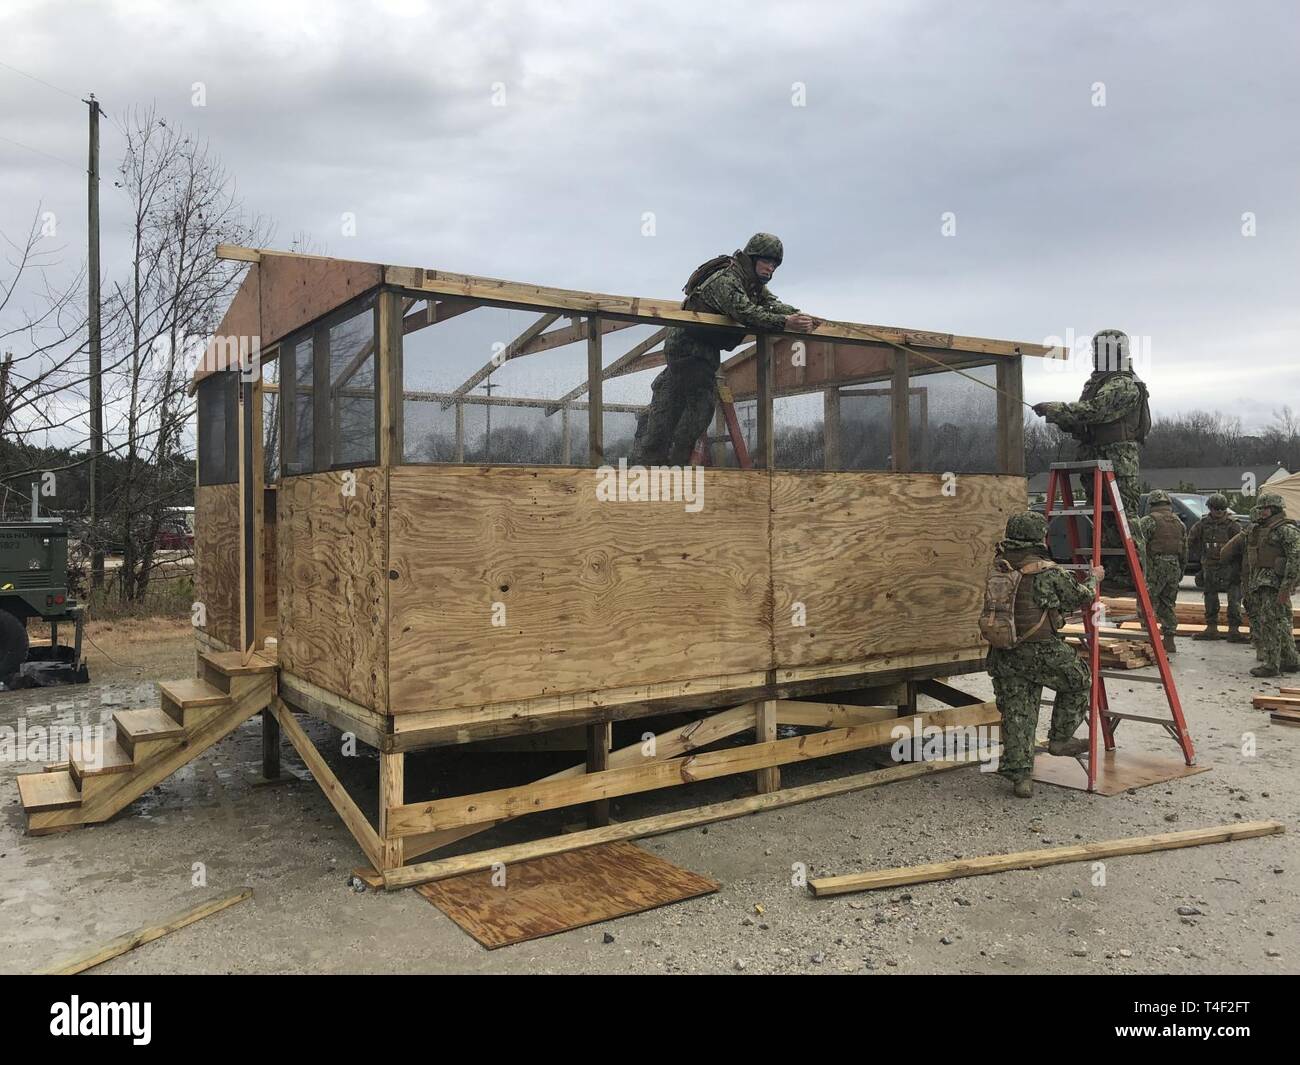 CHEATHAM ANNEX, Va. (Mar. 21, 2019) - Seabees from Construction Battalion Maintenance Unit (CBMU) 202 construct a Southeast Asia Hut during a field training exercise at Cheatham Annex Naval Weapons Station Yorktown. CBMU-202 provides contingency public works support for advanced bases and expeditionary medical facilities, expeditionary support for Naval Construction Force higher headquarters, line haul and equipment maintenance, general engineering, construction support, and humanitarian assistance and disaster recovery to Navy regional commanders. Stock Photo